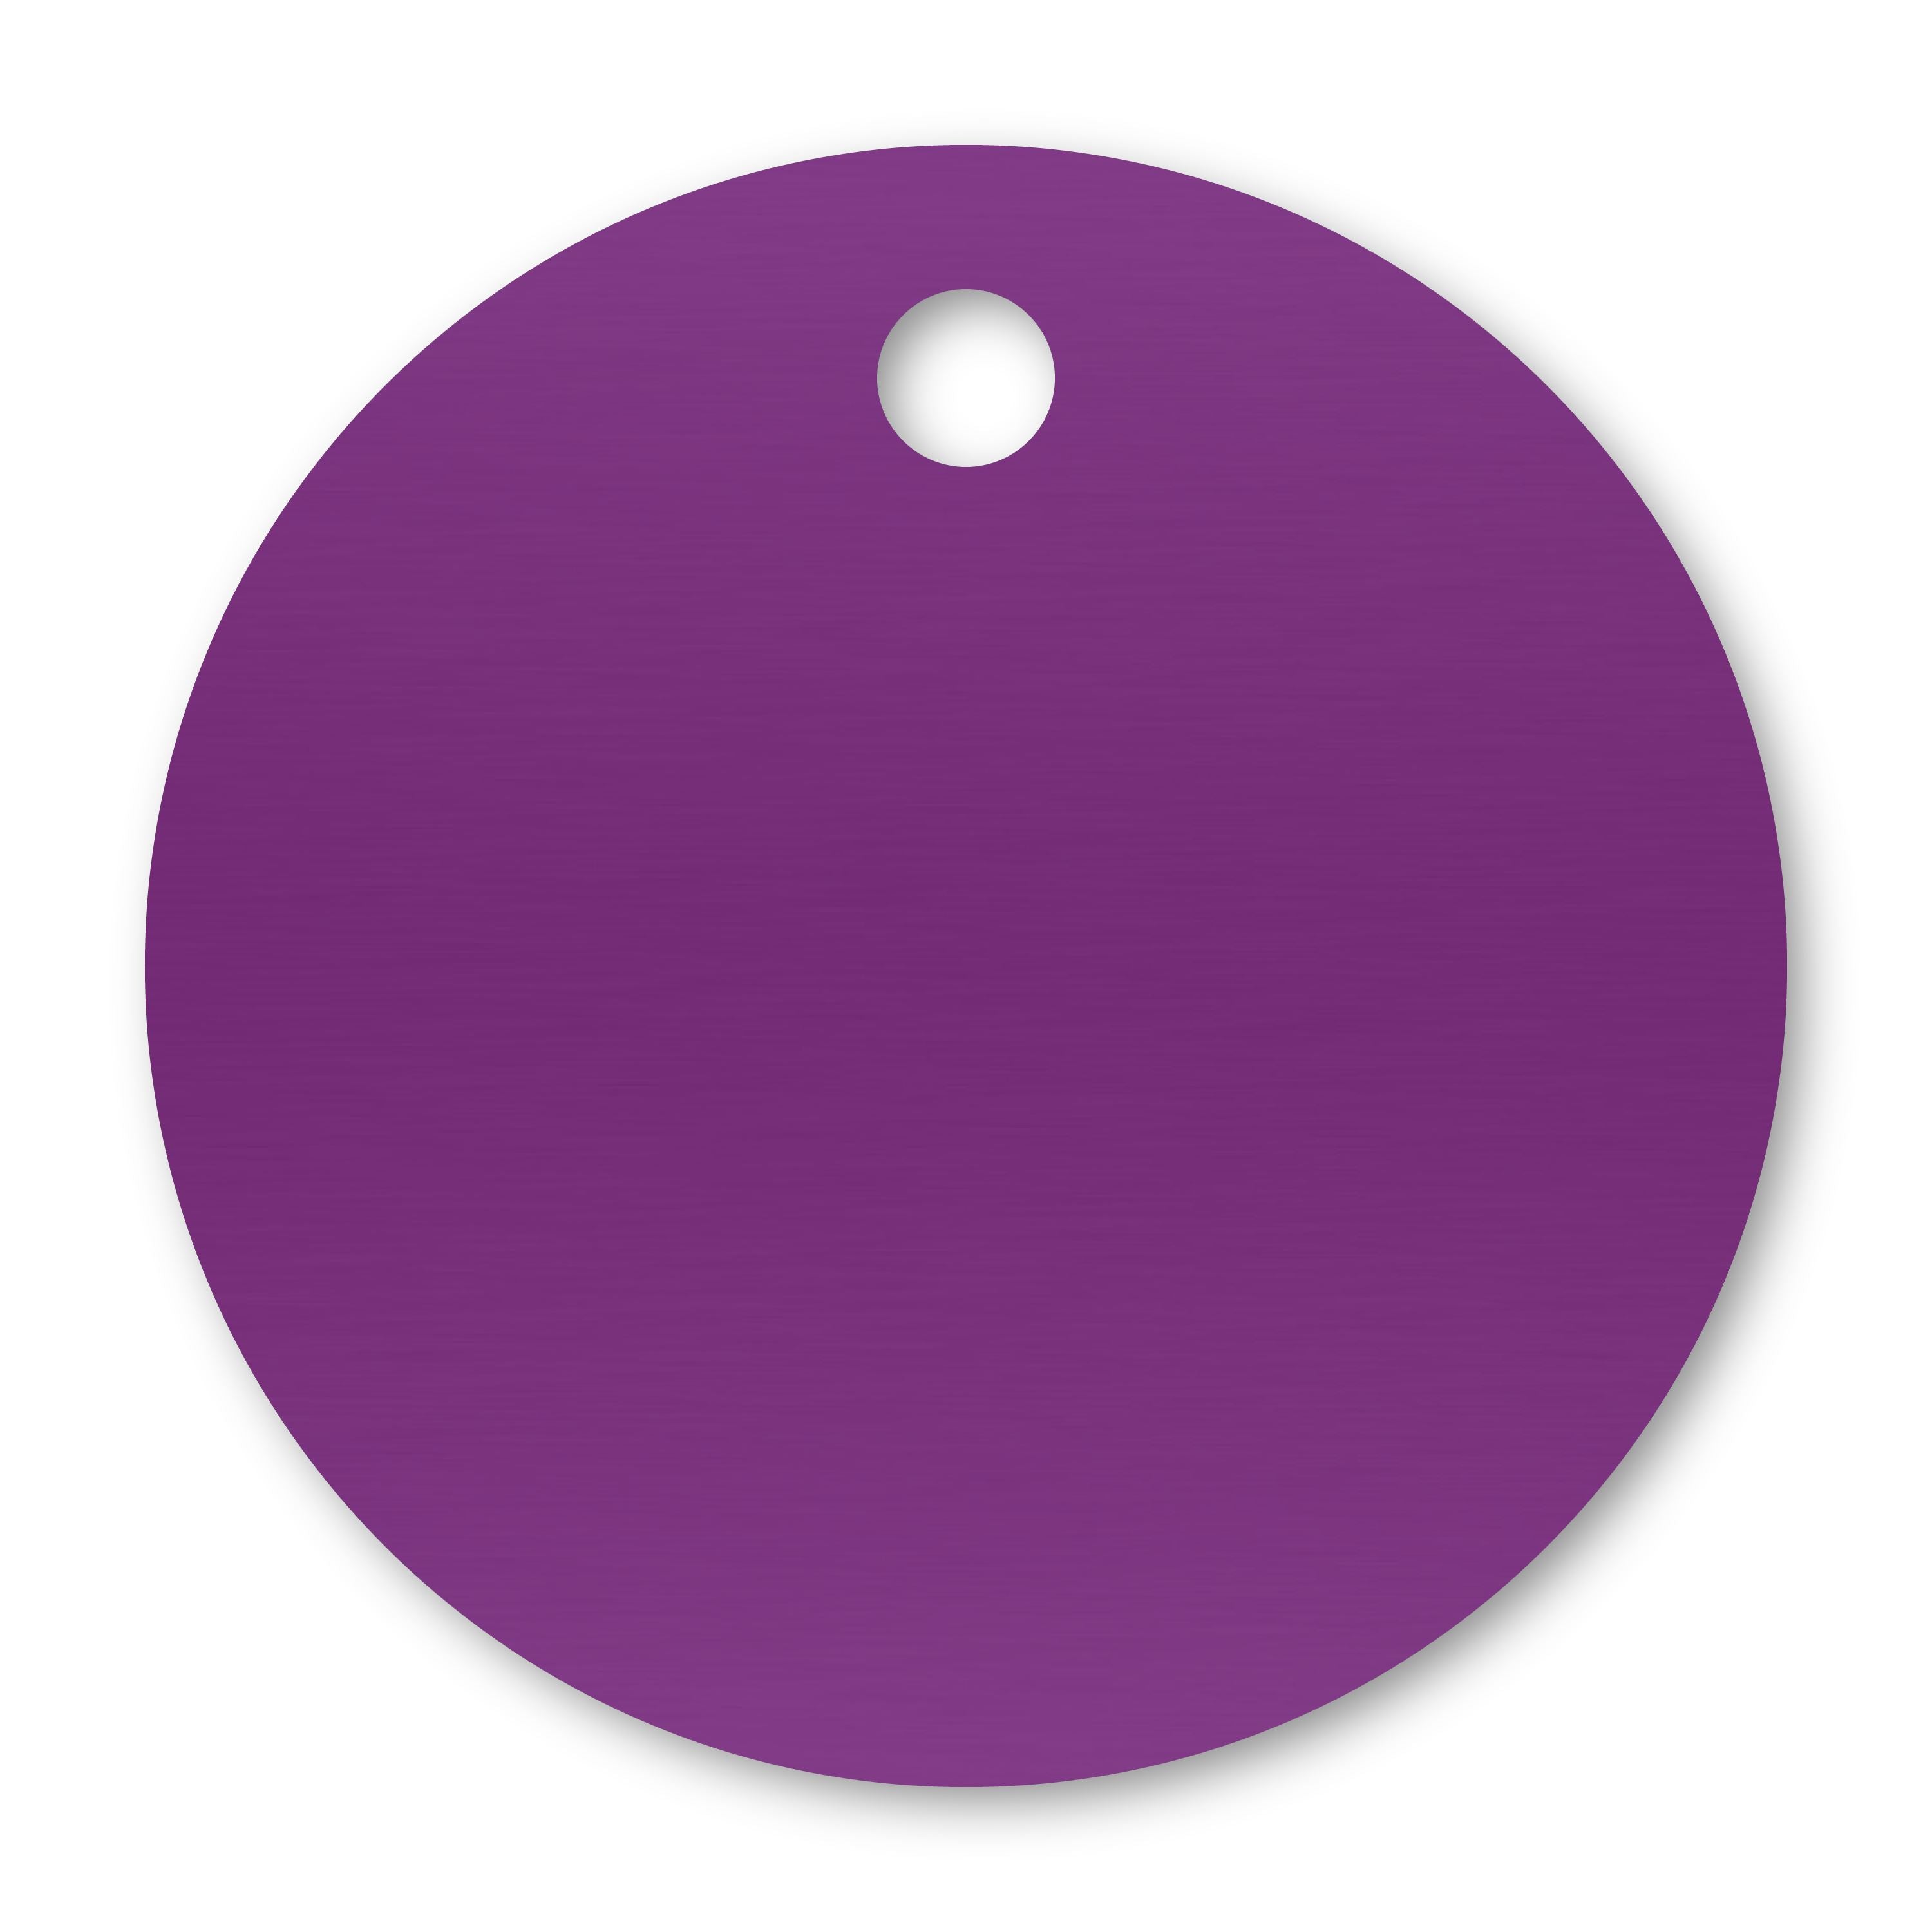 Anodized Aluminum Round Tags, 1-1/4" with 1/8" Hole, Laser Engraved Metal Tags Craftworks NW Purple 